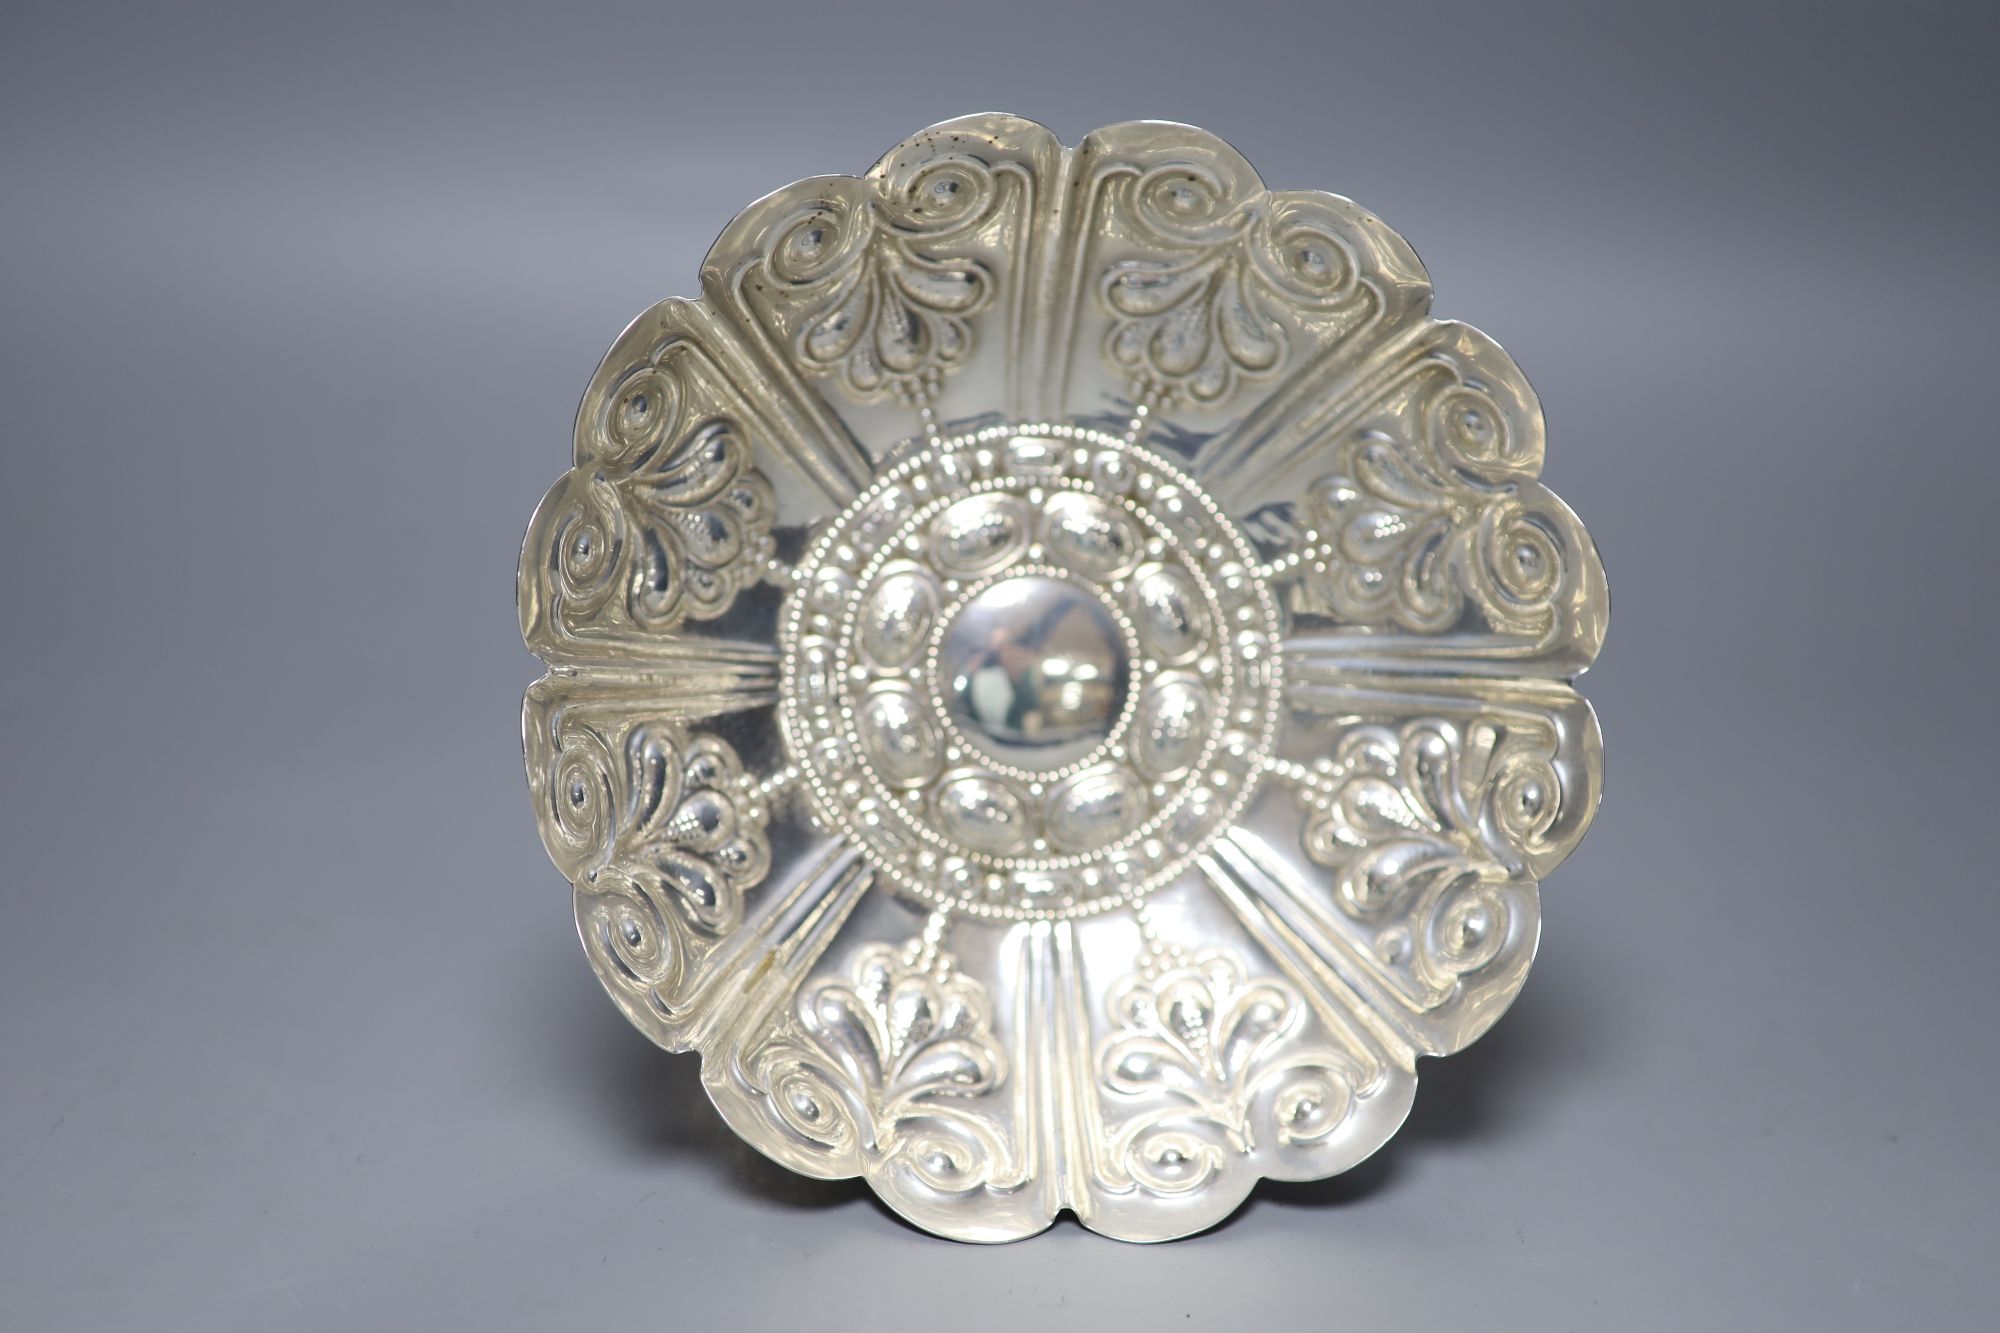 An Edwardian embossed silver circular pedestal dish of lobed form, George Nathan & Ridley Hayes, Chester 1906, 11.78oz.